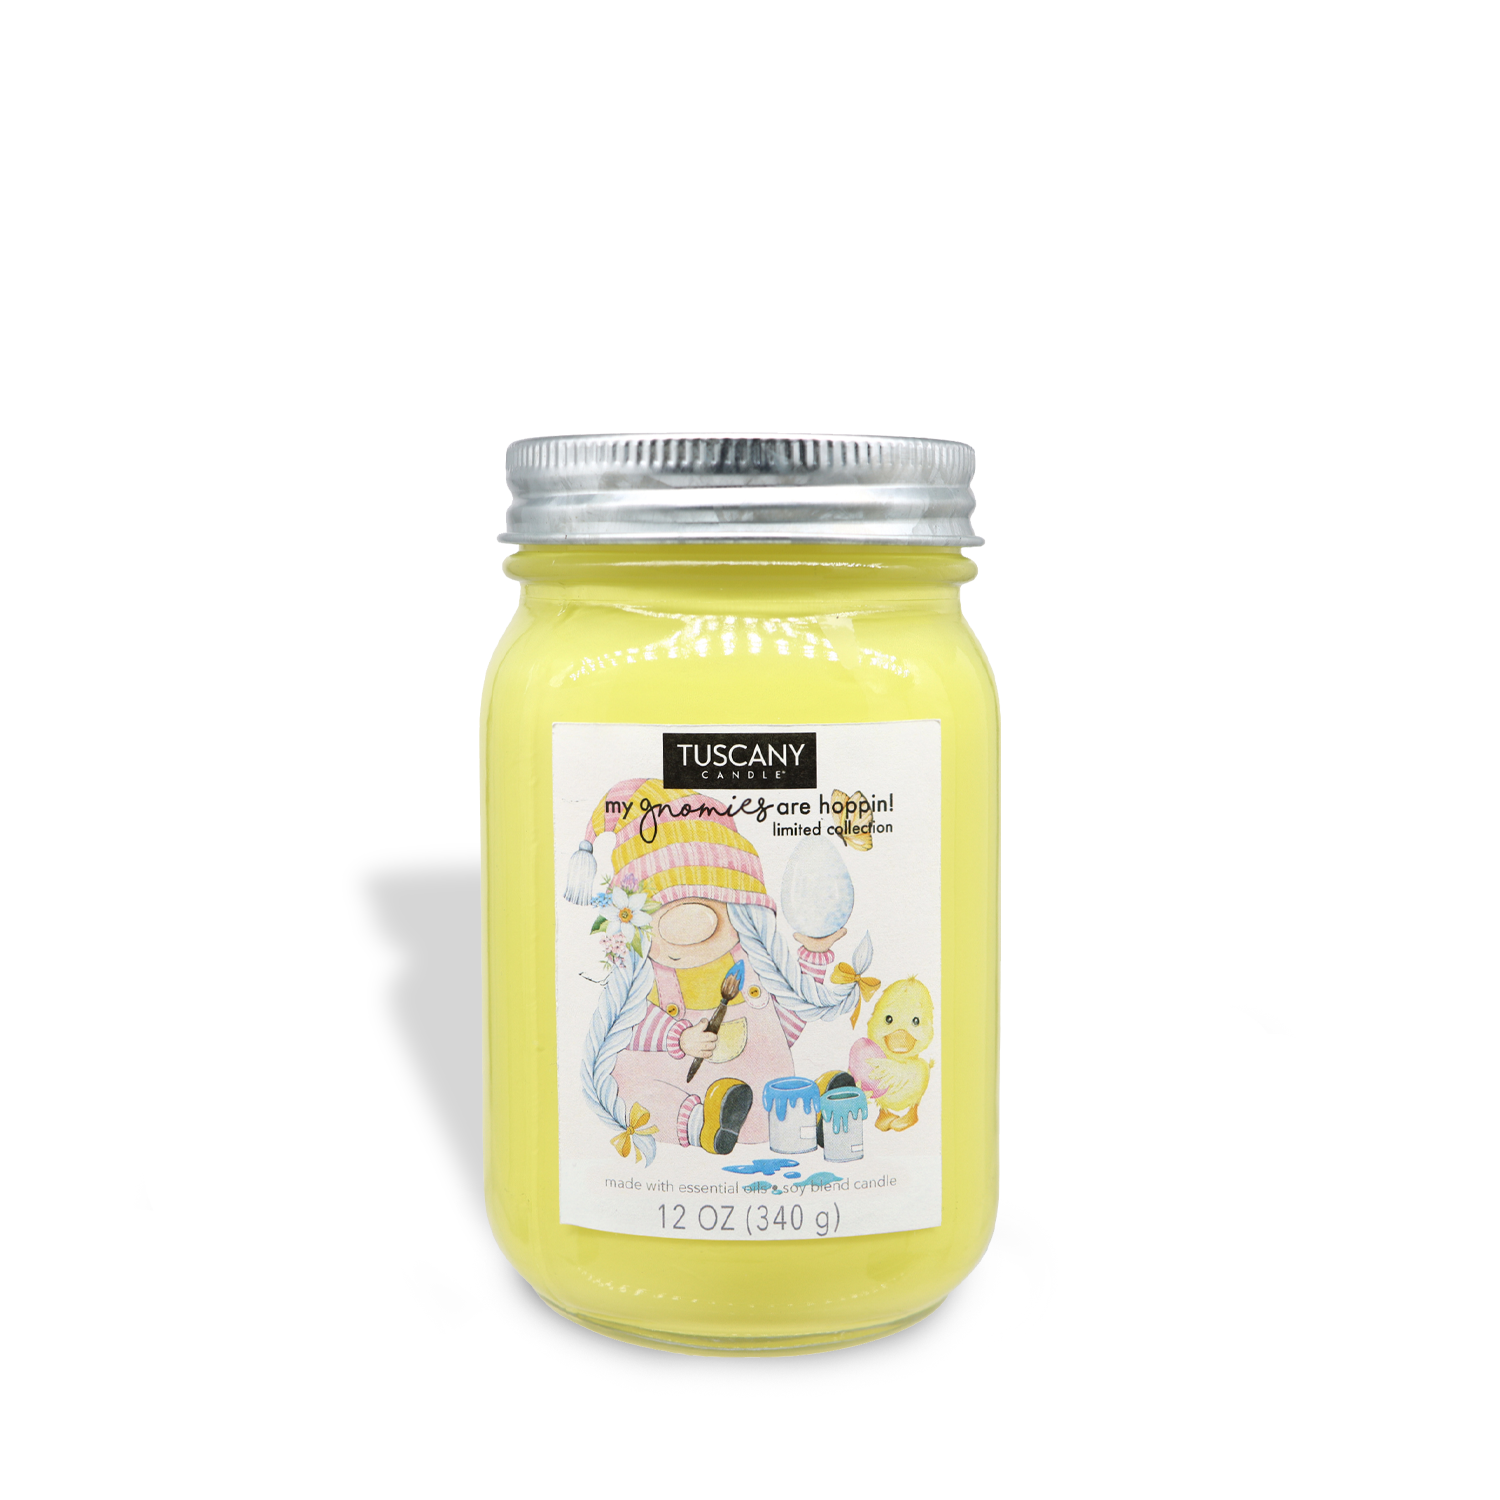 A yellow Eggstra Artistic Gnome (12 oz) candle jar with hints of vanilla on a white background — from the Tuscany Candle® SEASONAL brand.